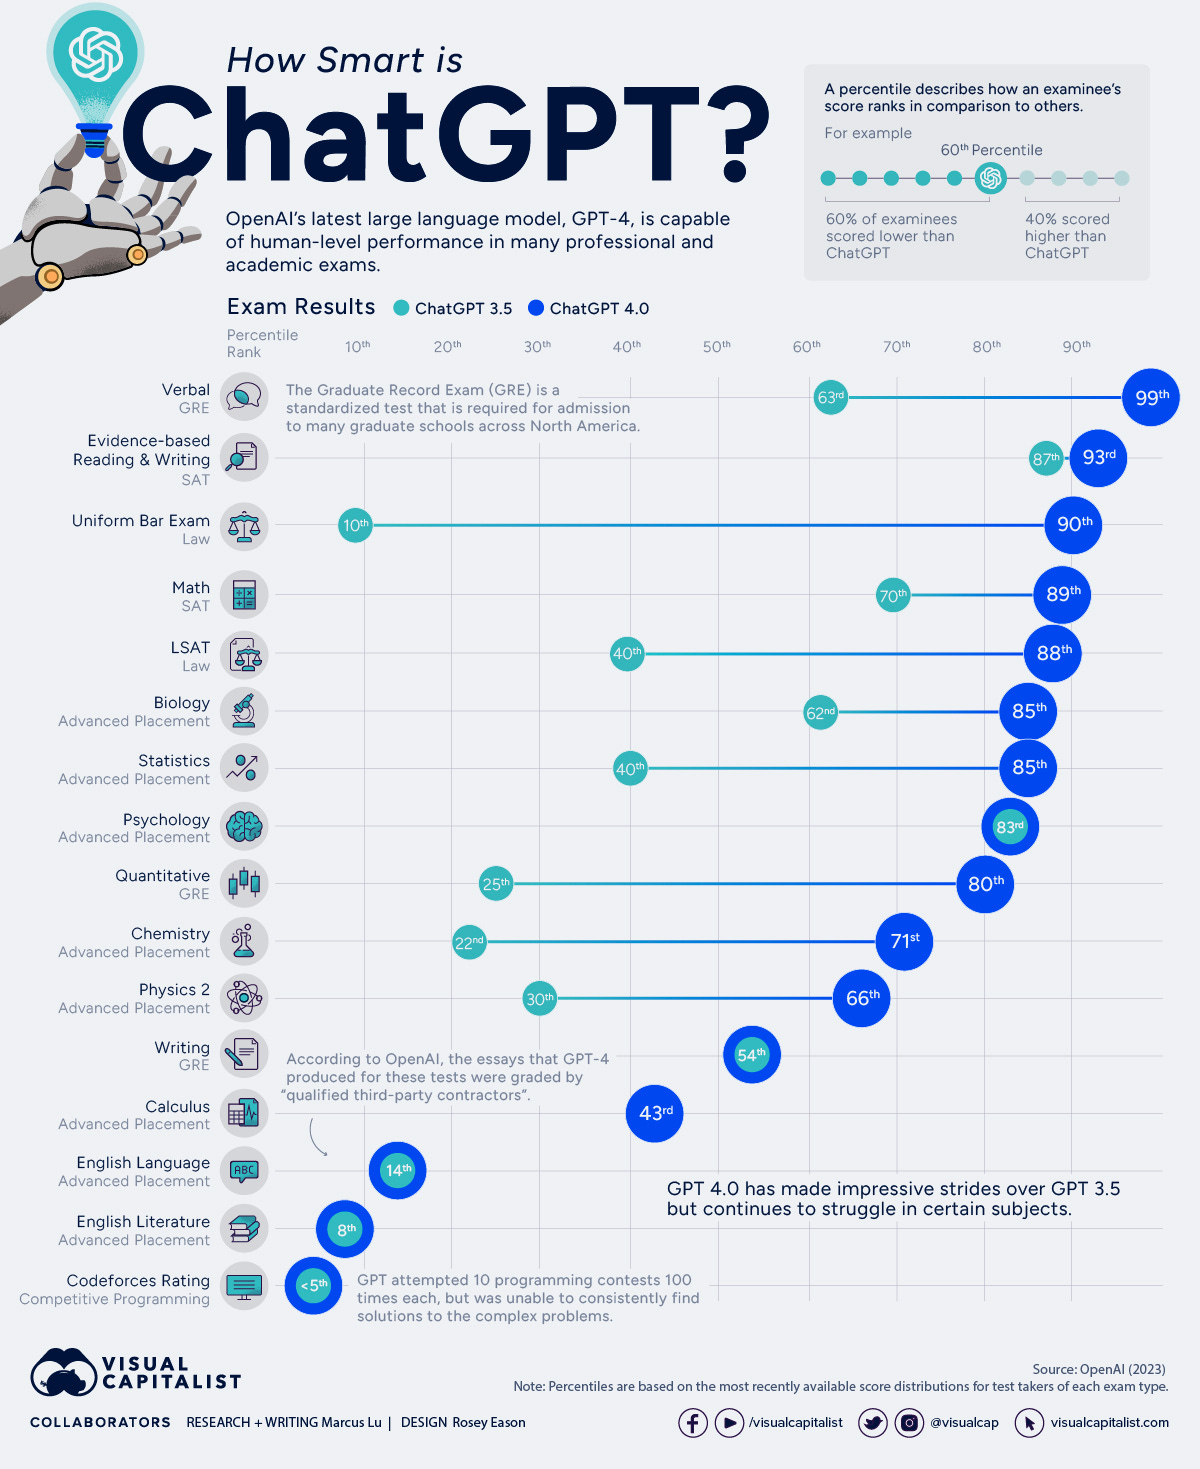 How smart is ChatGPT? We examine exam scores in this infographic